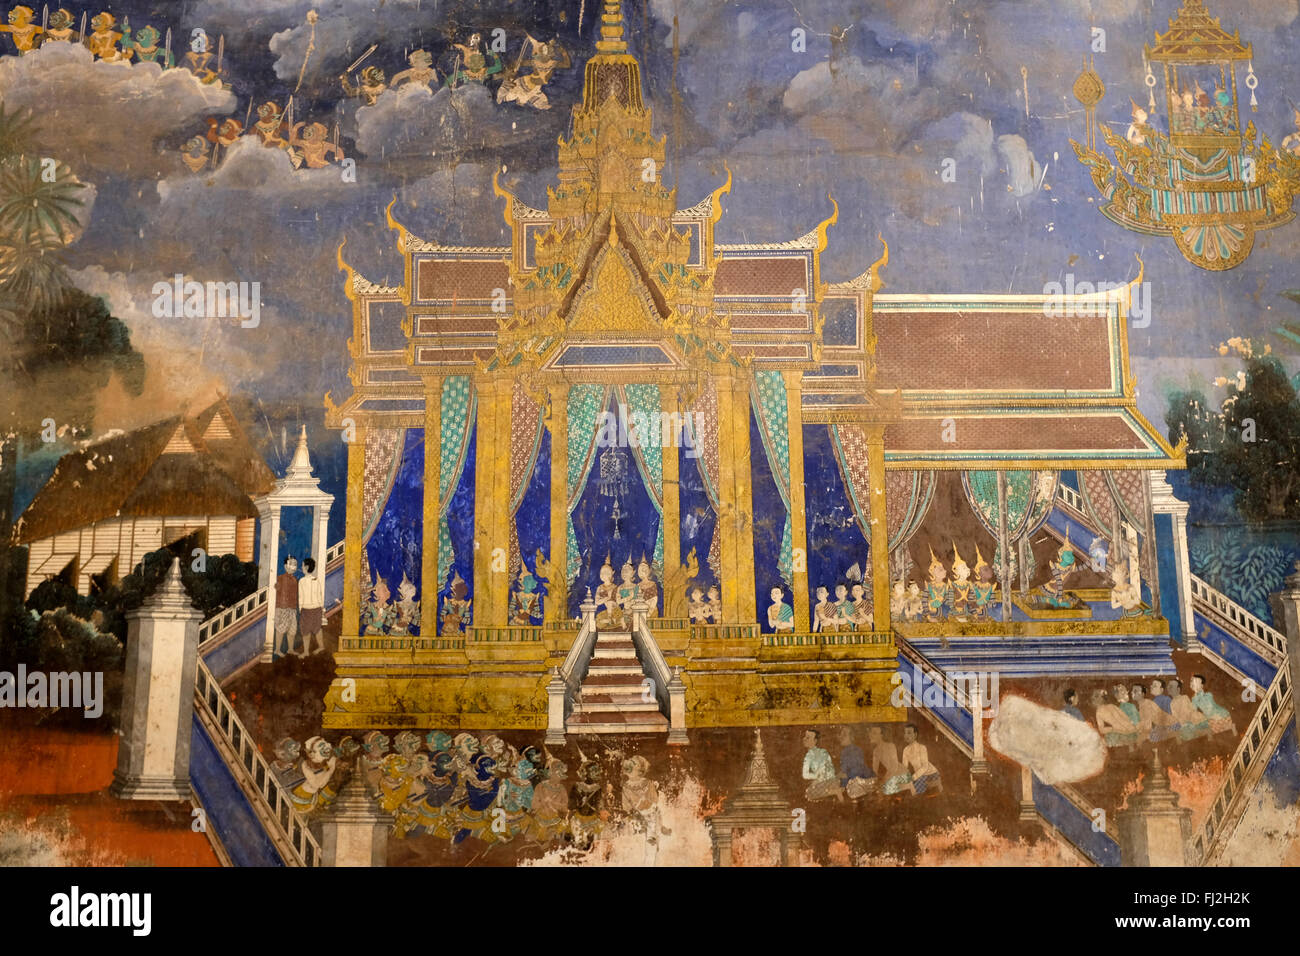 Wall painting in Royal Palace in Phnom Penh, Cambodia Stock Photo